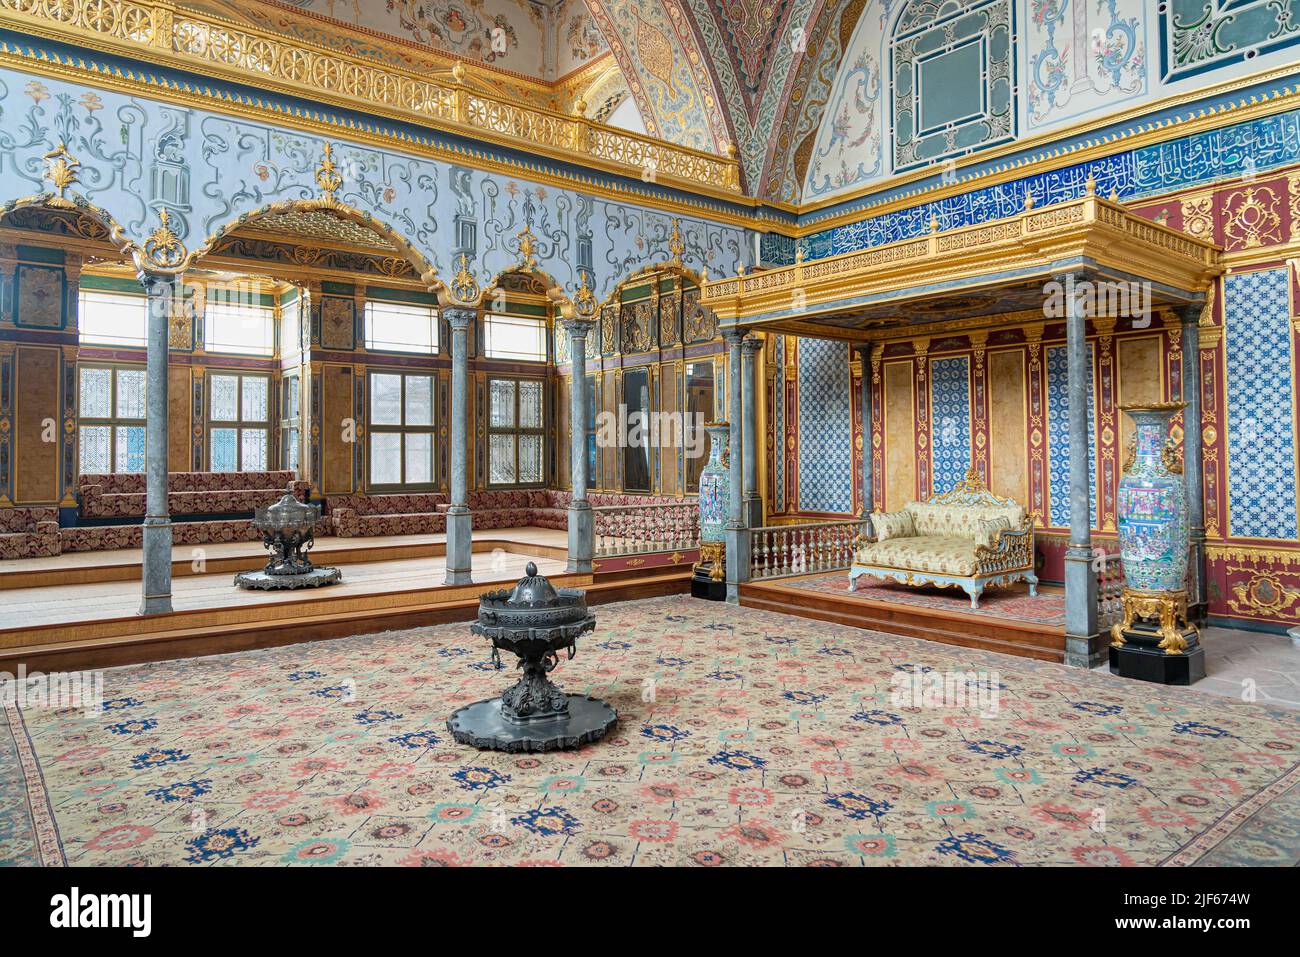 The harem of the sultans in the TOPKAPI PALACE ISTANBUL Stock Photo